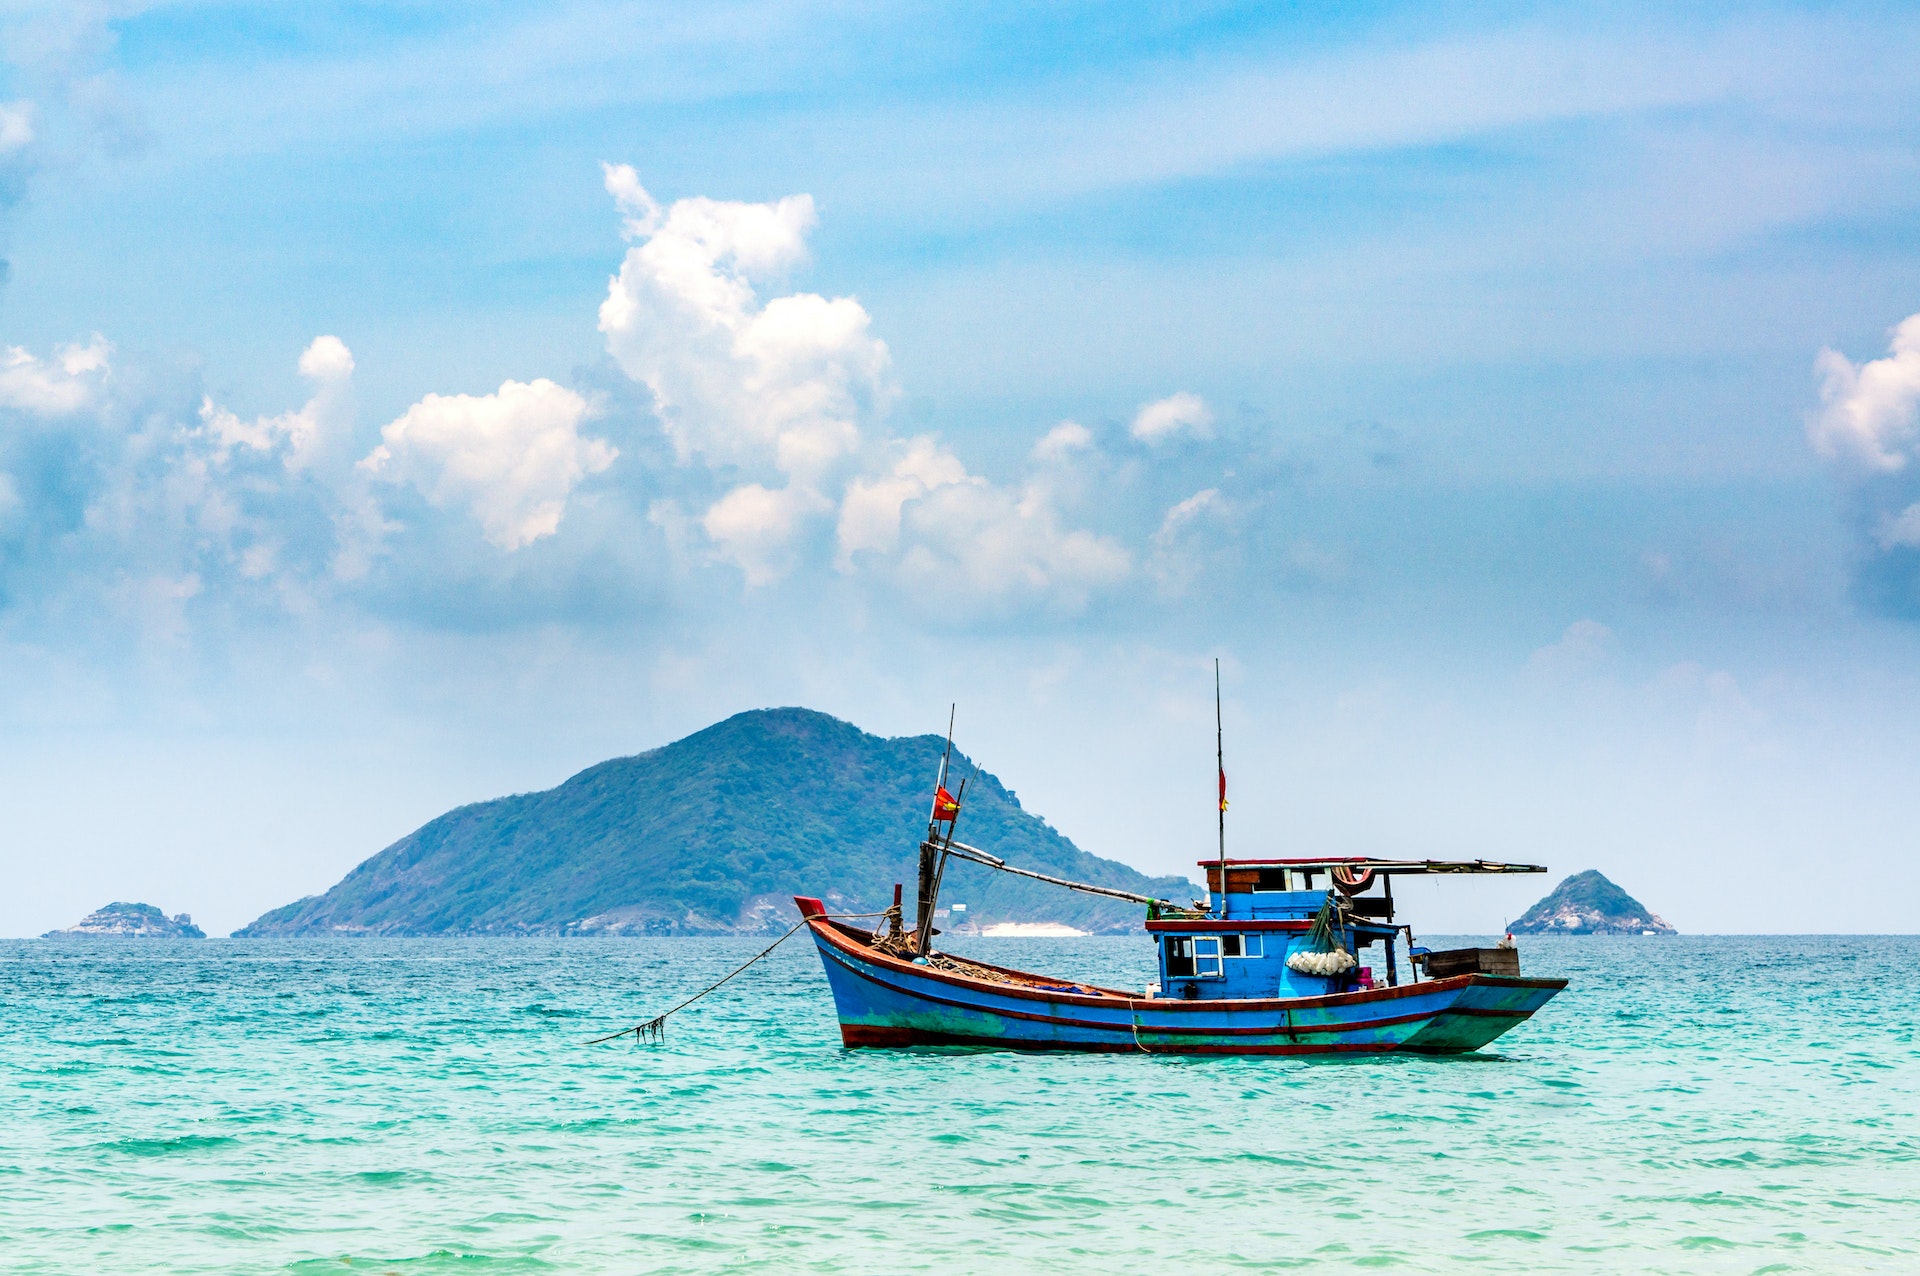 A fishing boat floating in blue waters off the Con Dao islands